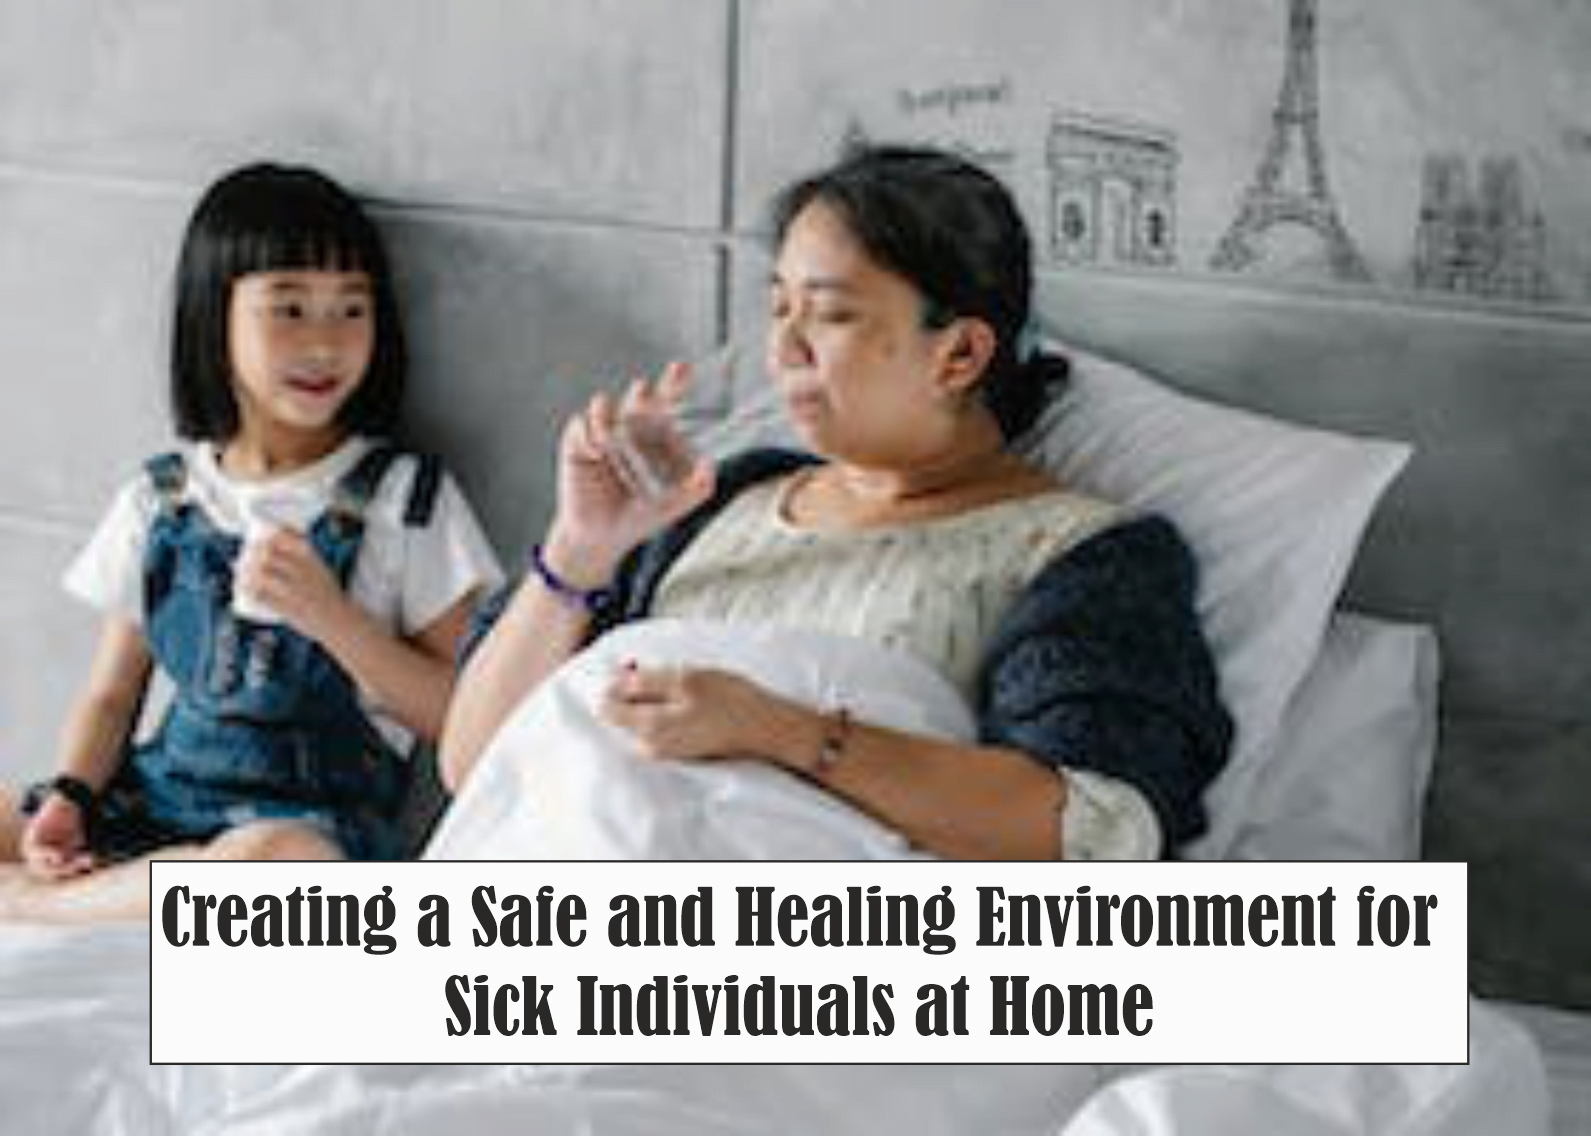 Creating a Safe and Healing Environment for Sick Individuals at Home